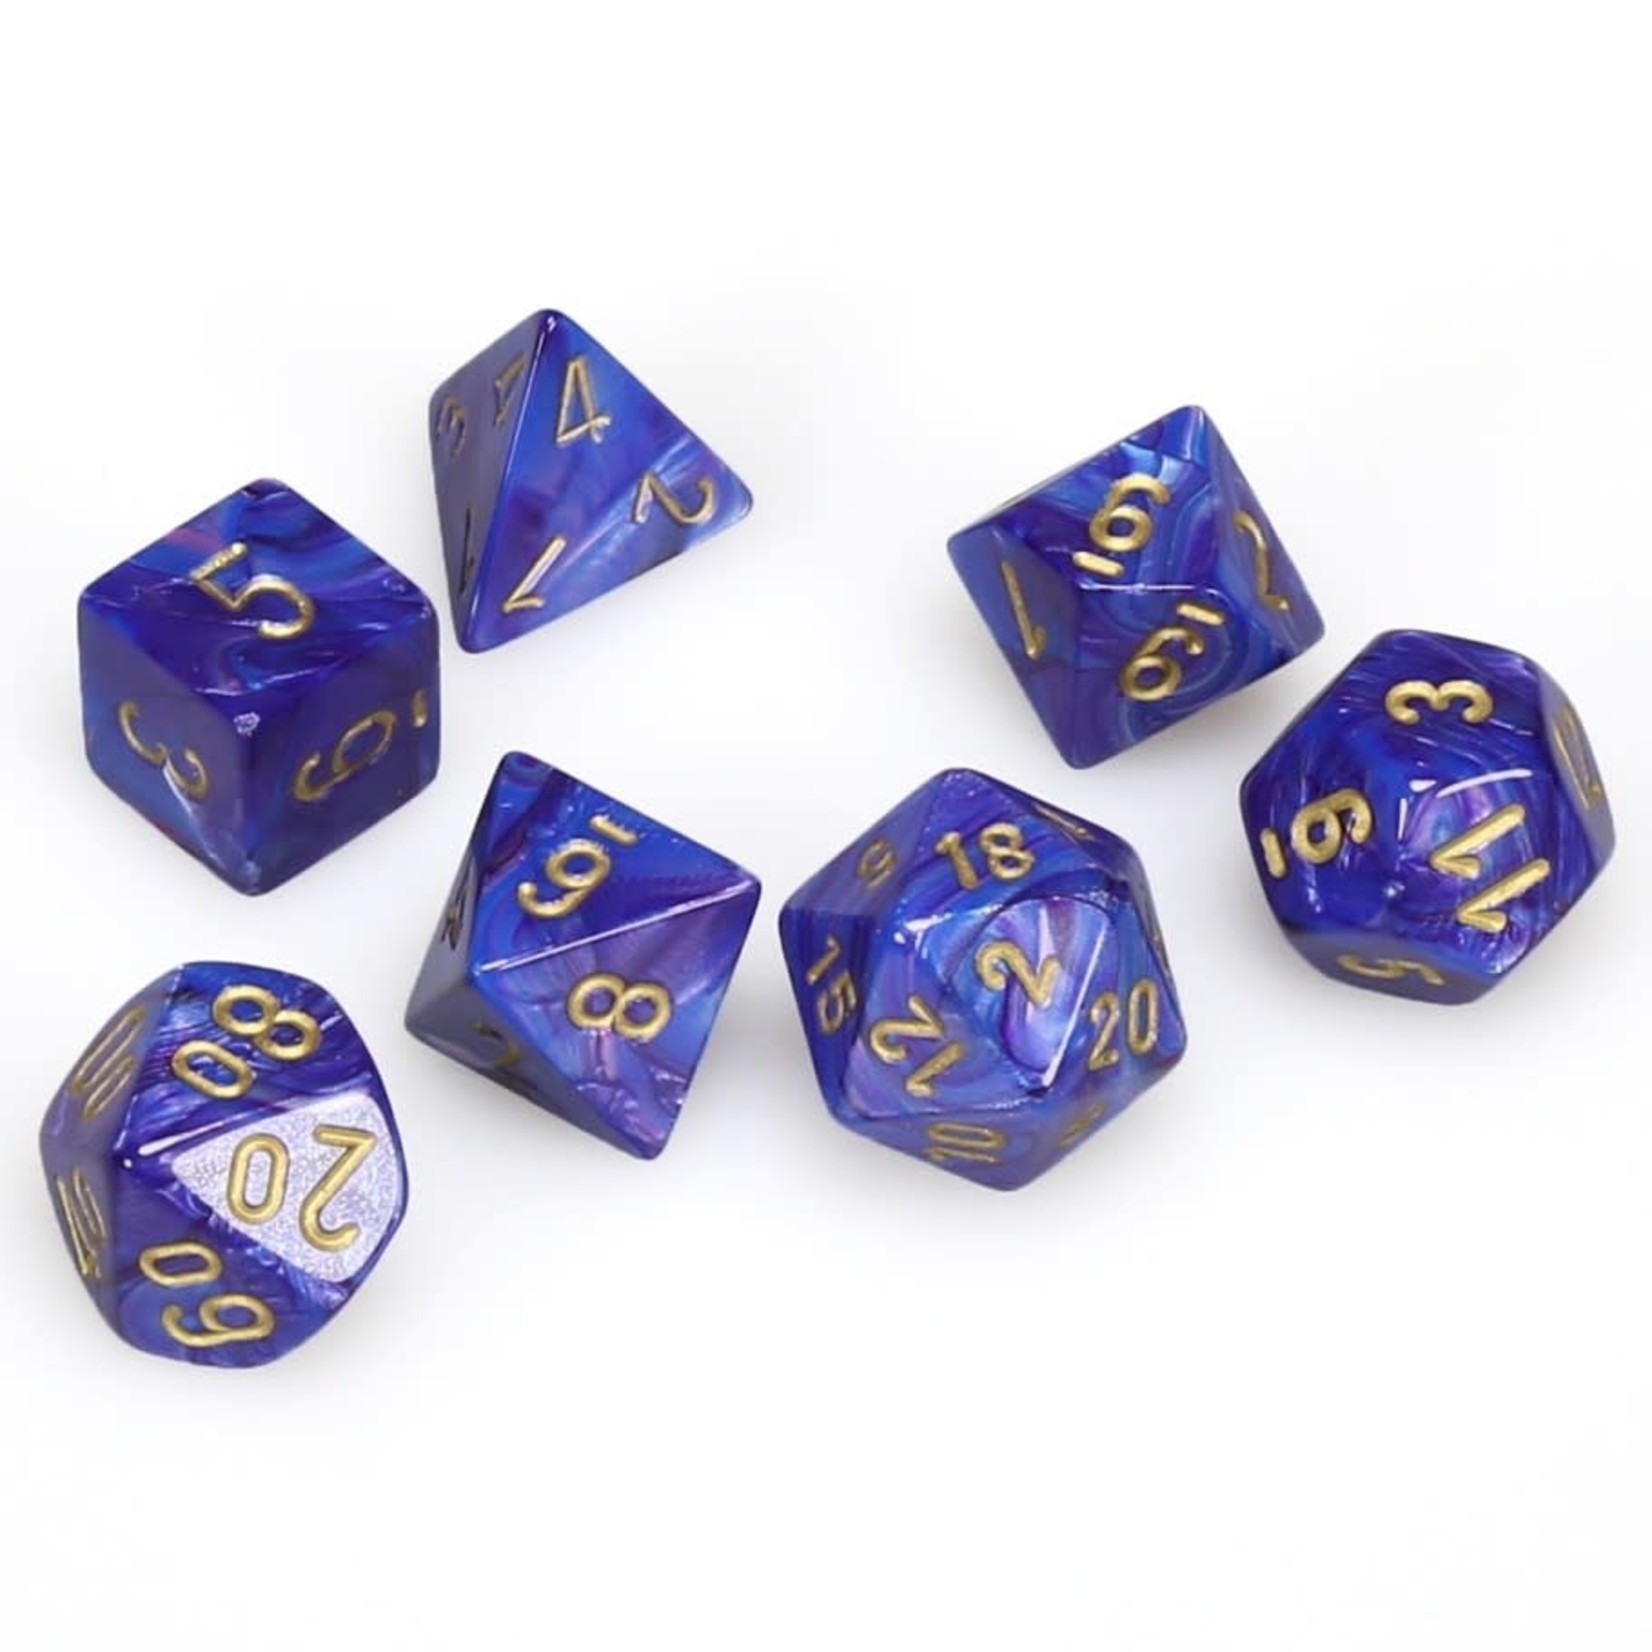 Chessex Chessex Lustrous Purple with Gold Polyhedral 7 die set